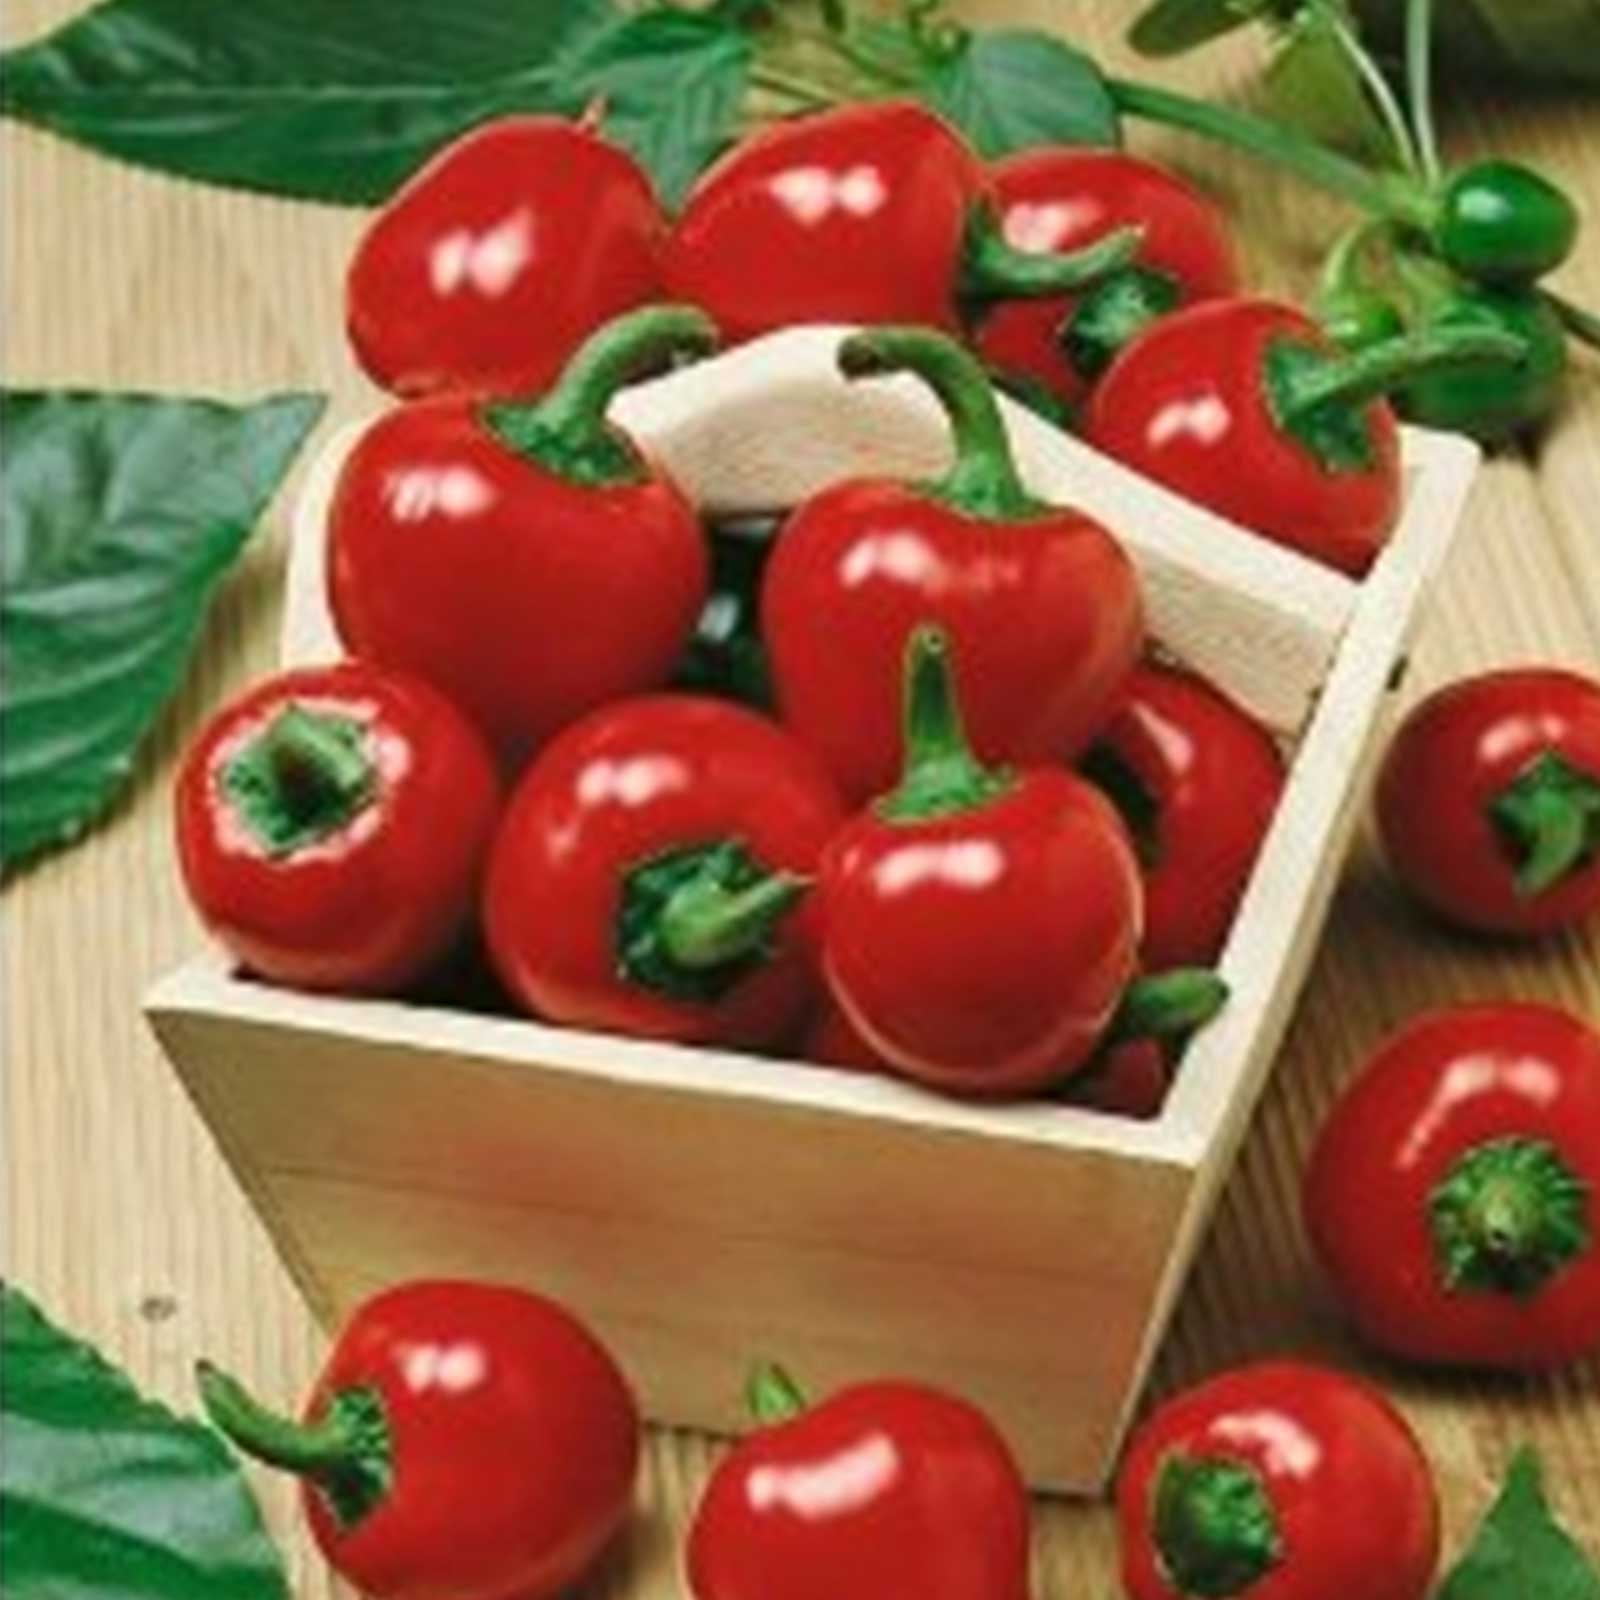 Non-GMO organically Grown Extra Large Jalapeno Pepper Seeds 25 Seeds